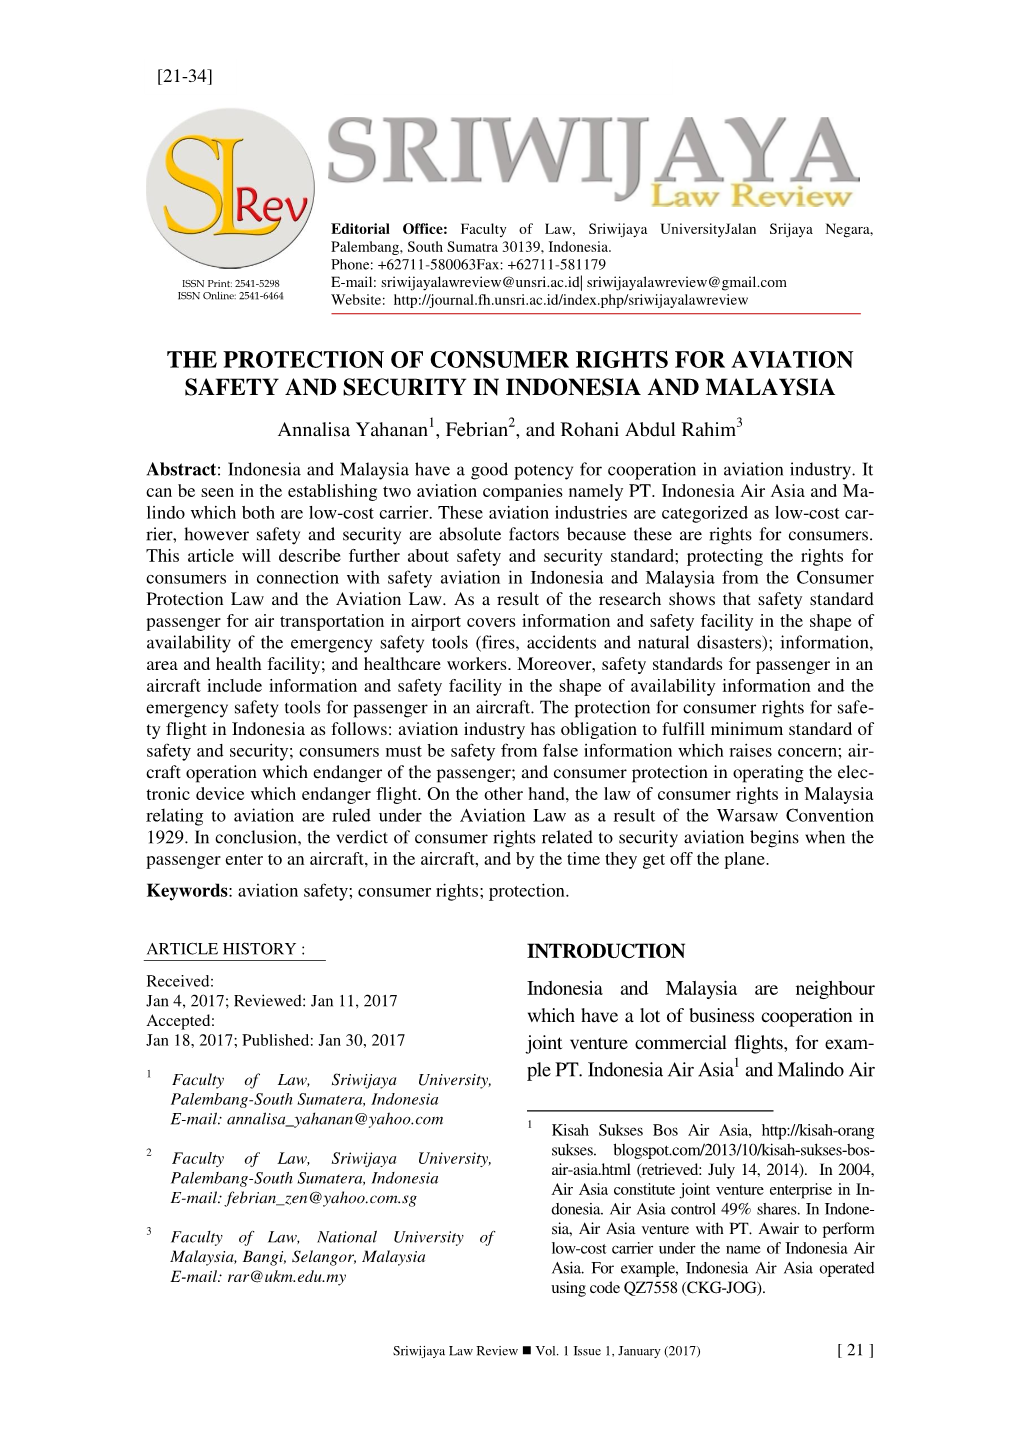 The Protection of Consumer Rights for Aviation Safety and Security in Indonesia and Malaysia